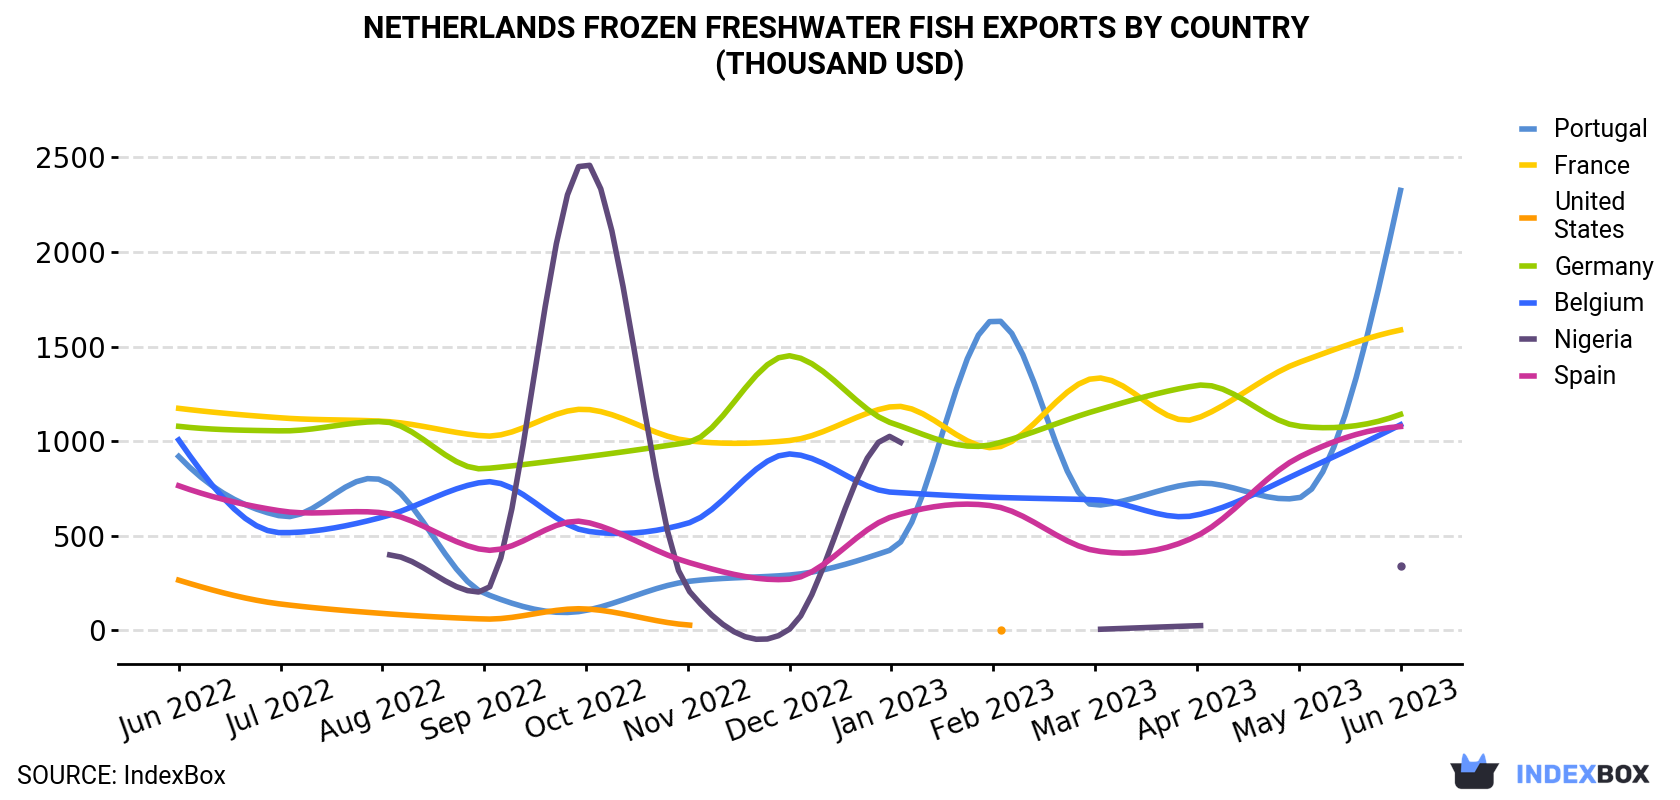 Netherlands Frozen Freshwater Fish Exports By Country (Thousand USD)